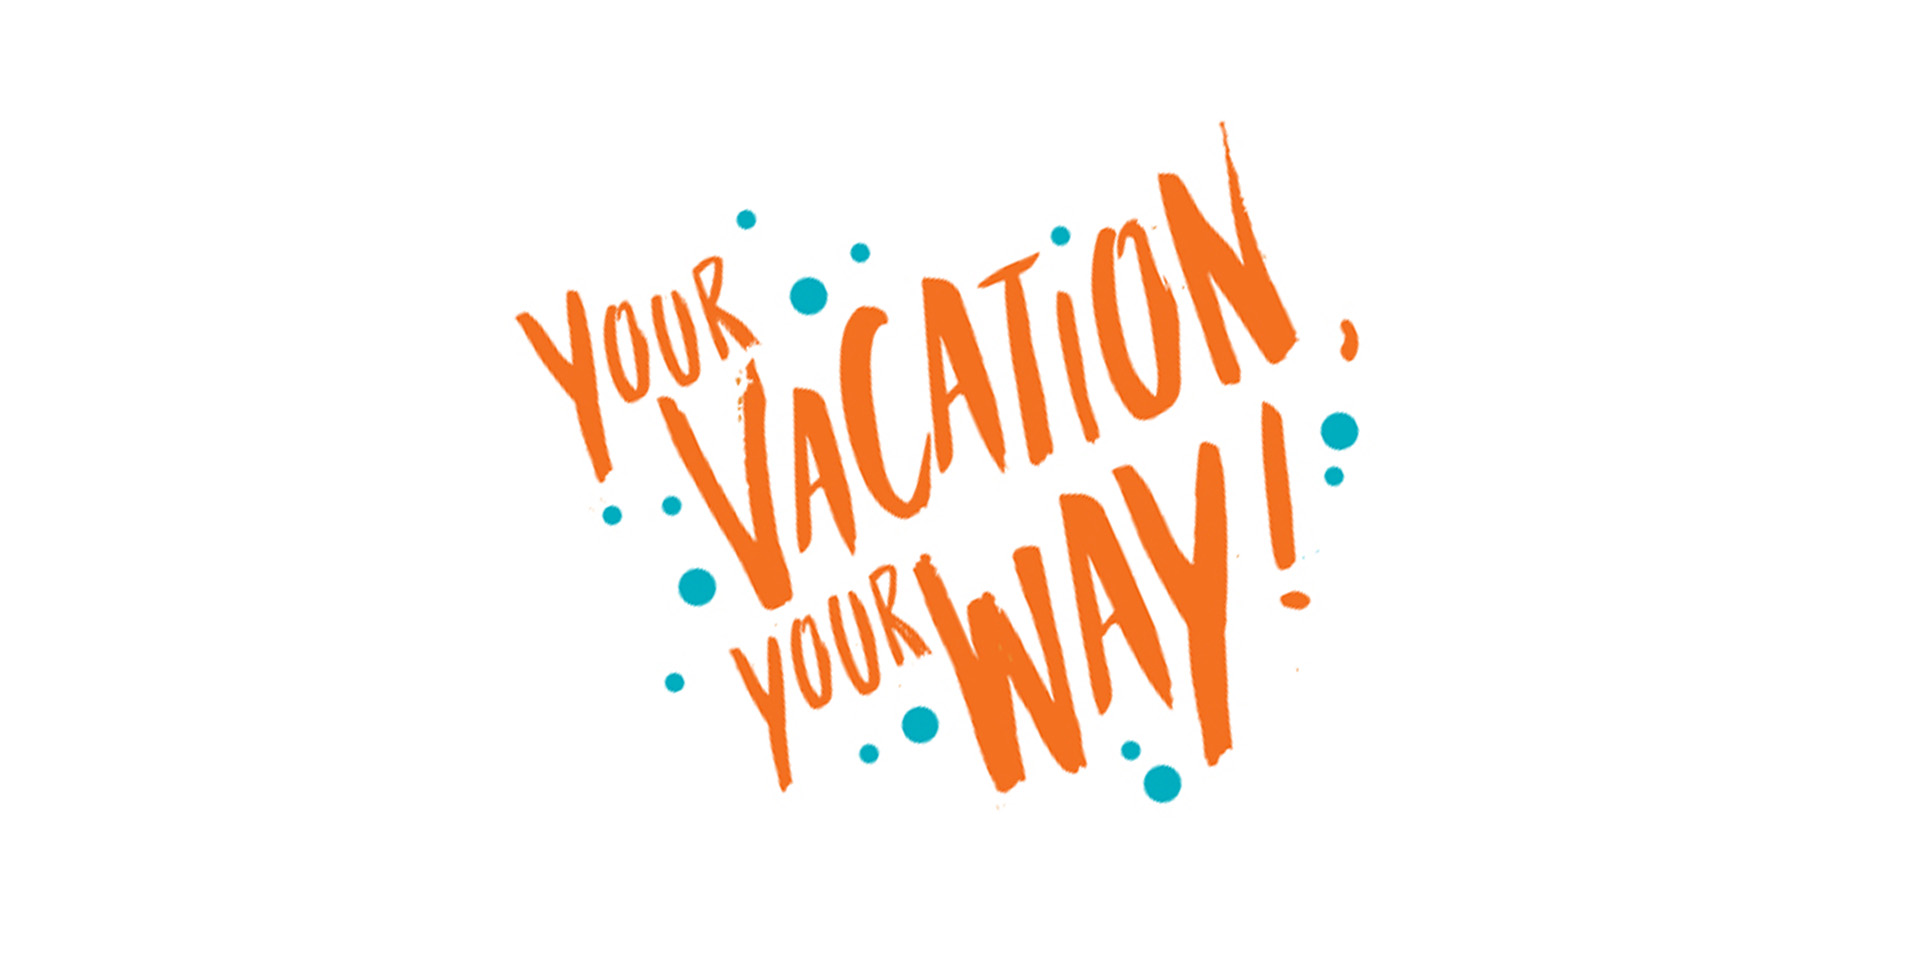 Tagline: Your Vacation Your Way